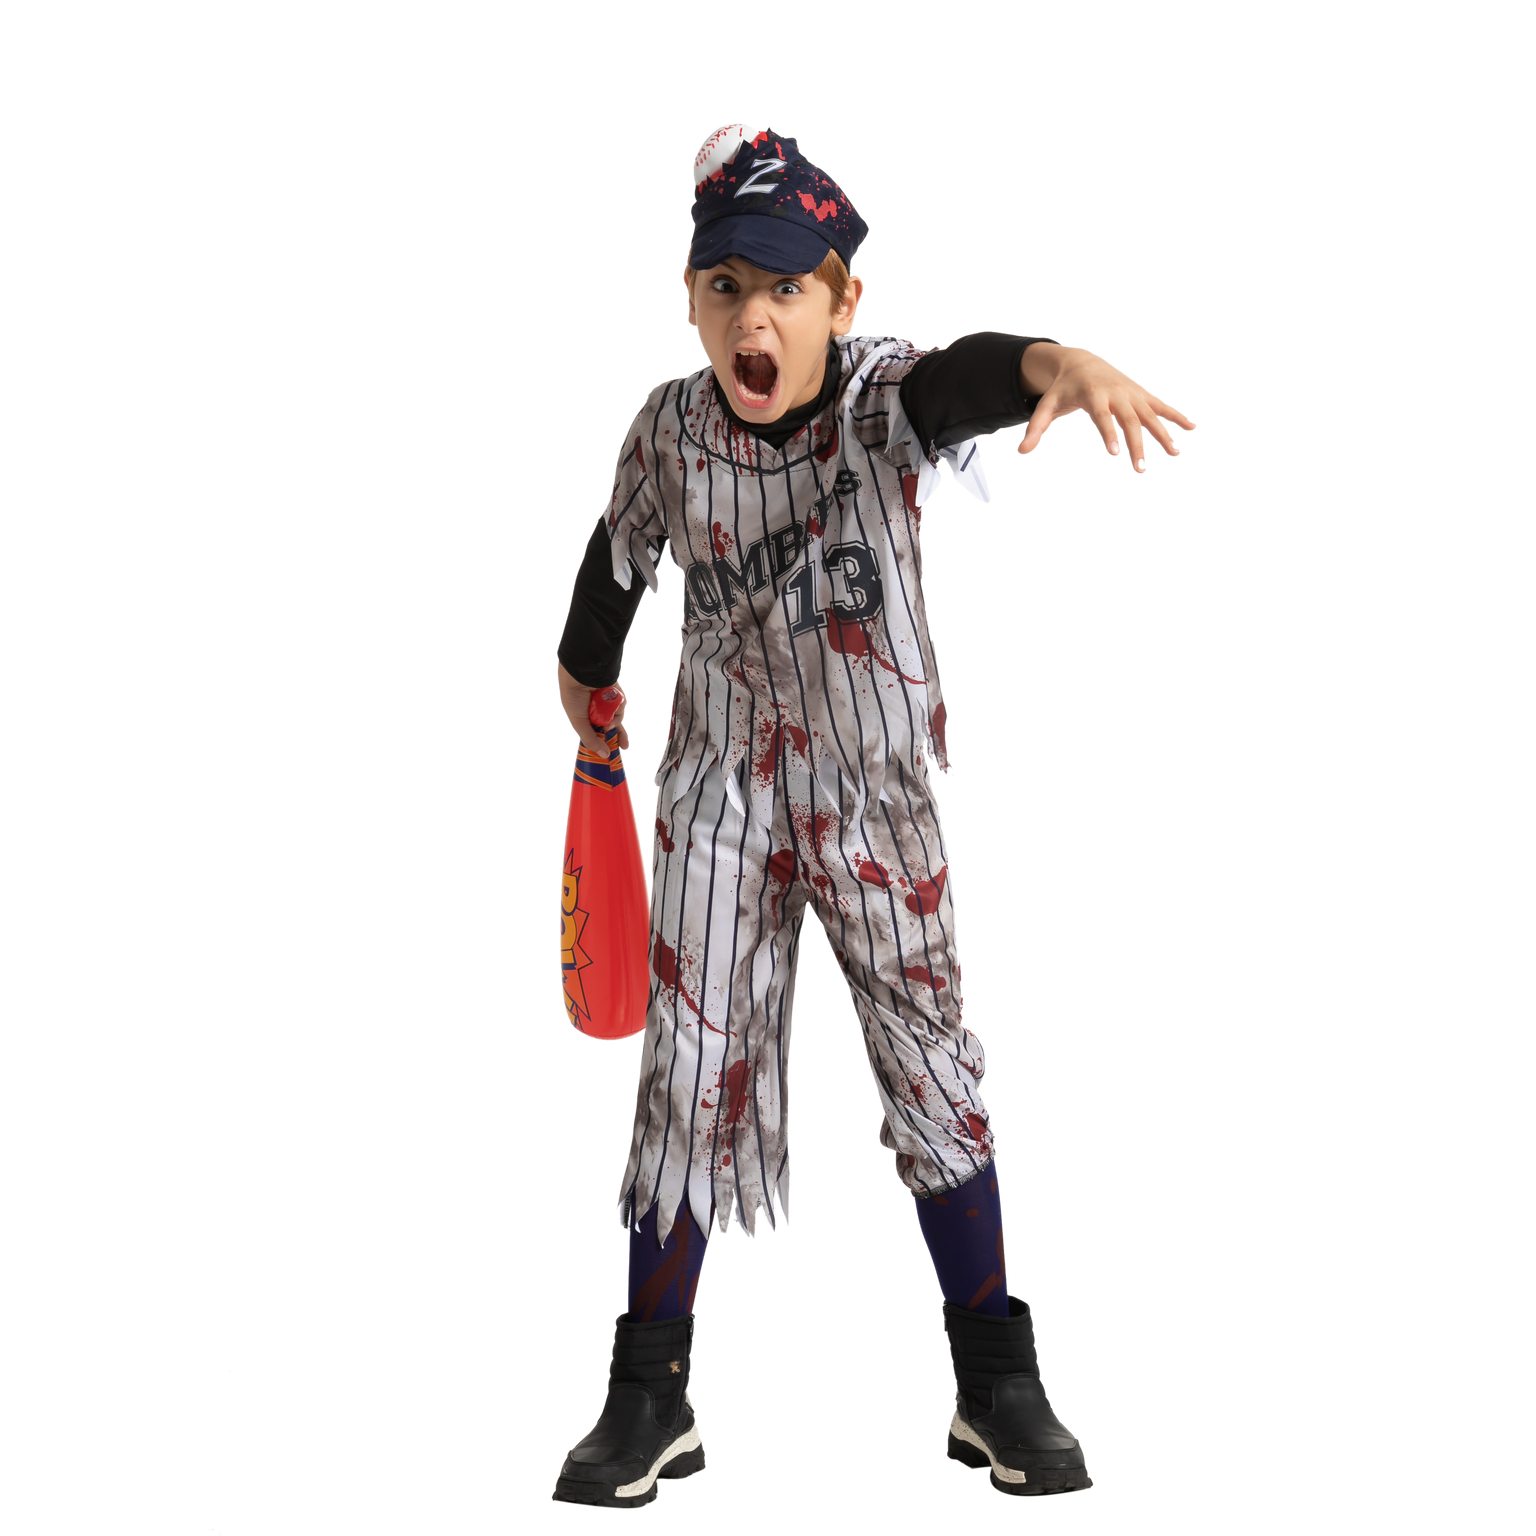 Toddler Baseball Player Costume - In Stock : About Costume Shop